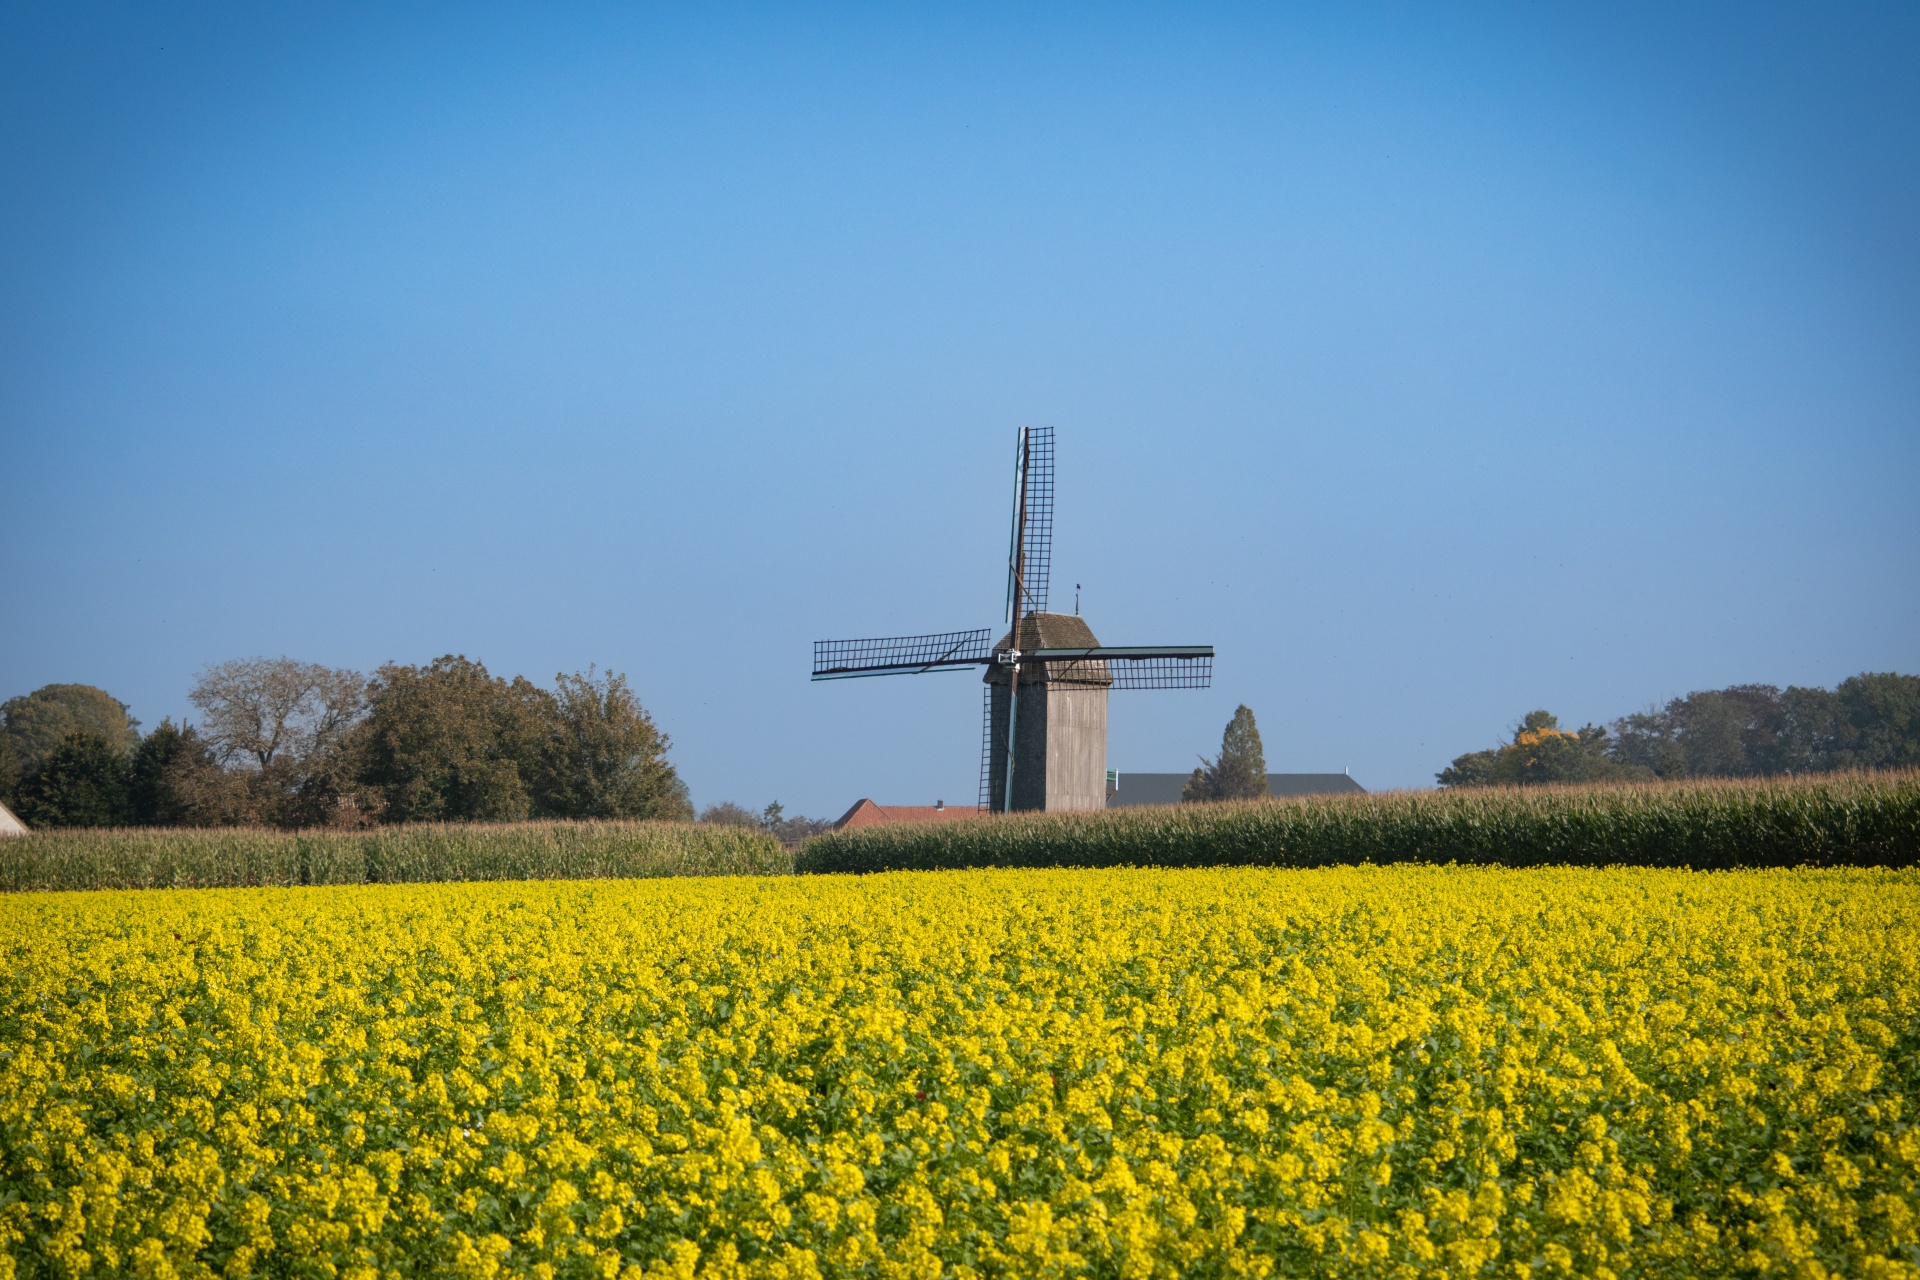 Beautiful yellow rapeseed field with a wooden windmill in the background, landscape